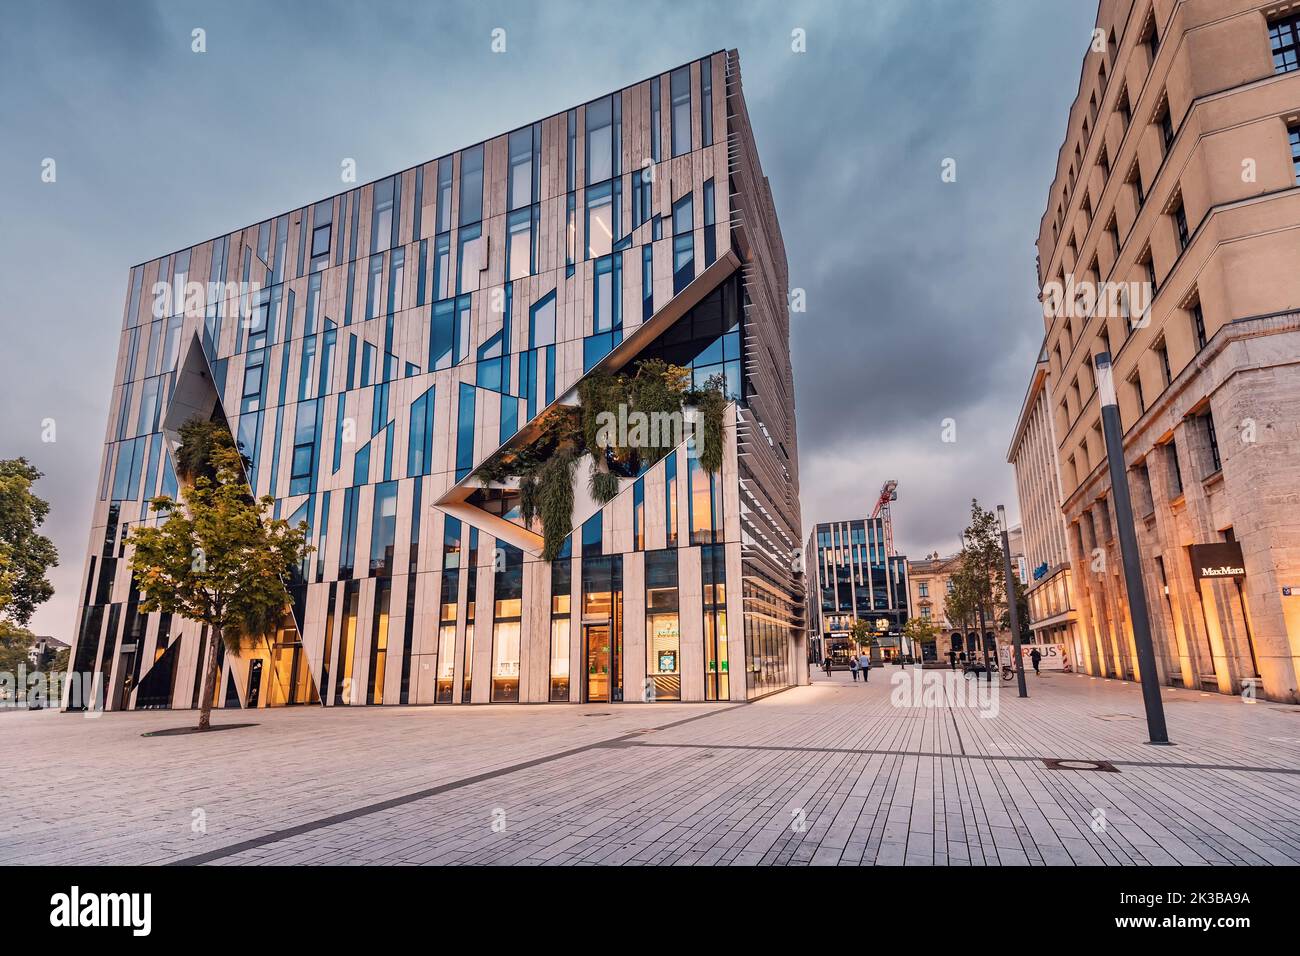 21 July 2022, Dusseldorf, Germany: Cityscape with Ko Bogen famous modern architecture building. It is popular sightseeing, business and shopping cente Stock Photo